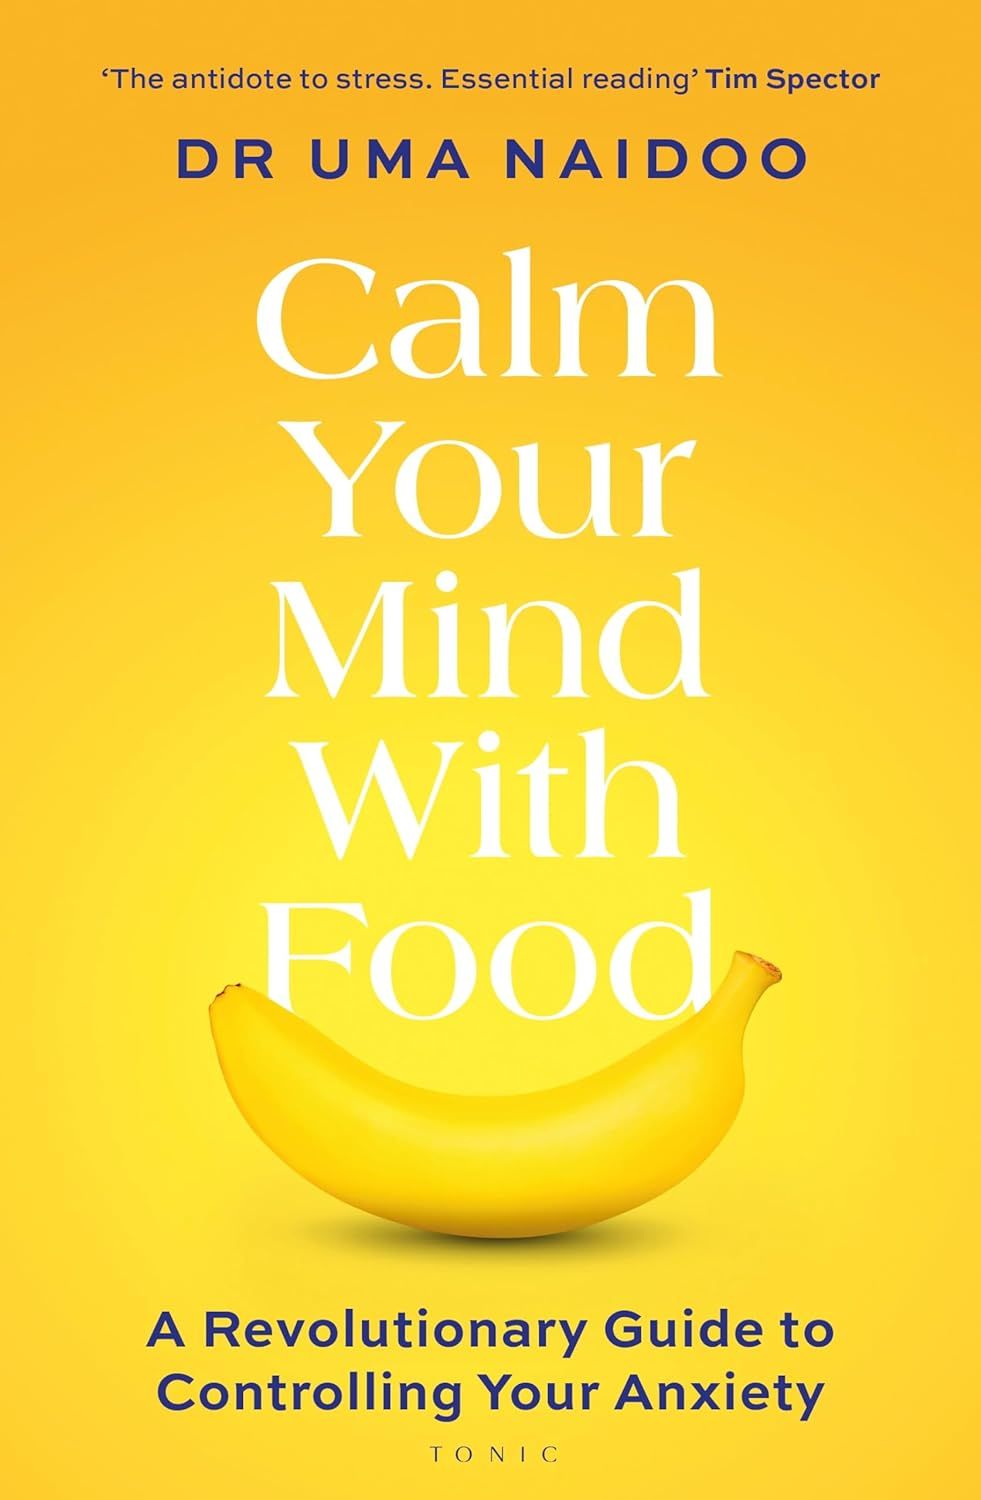 Calm your mind